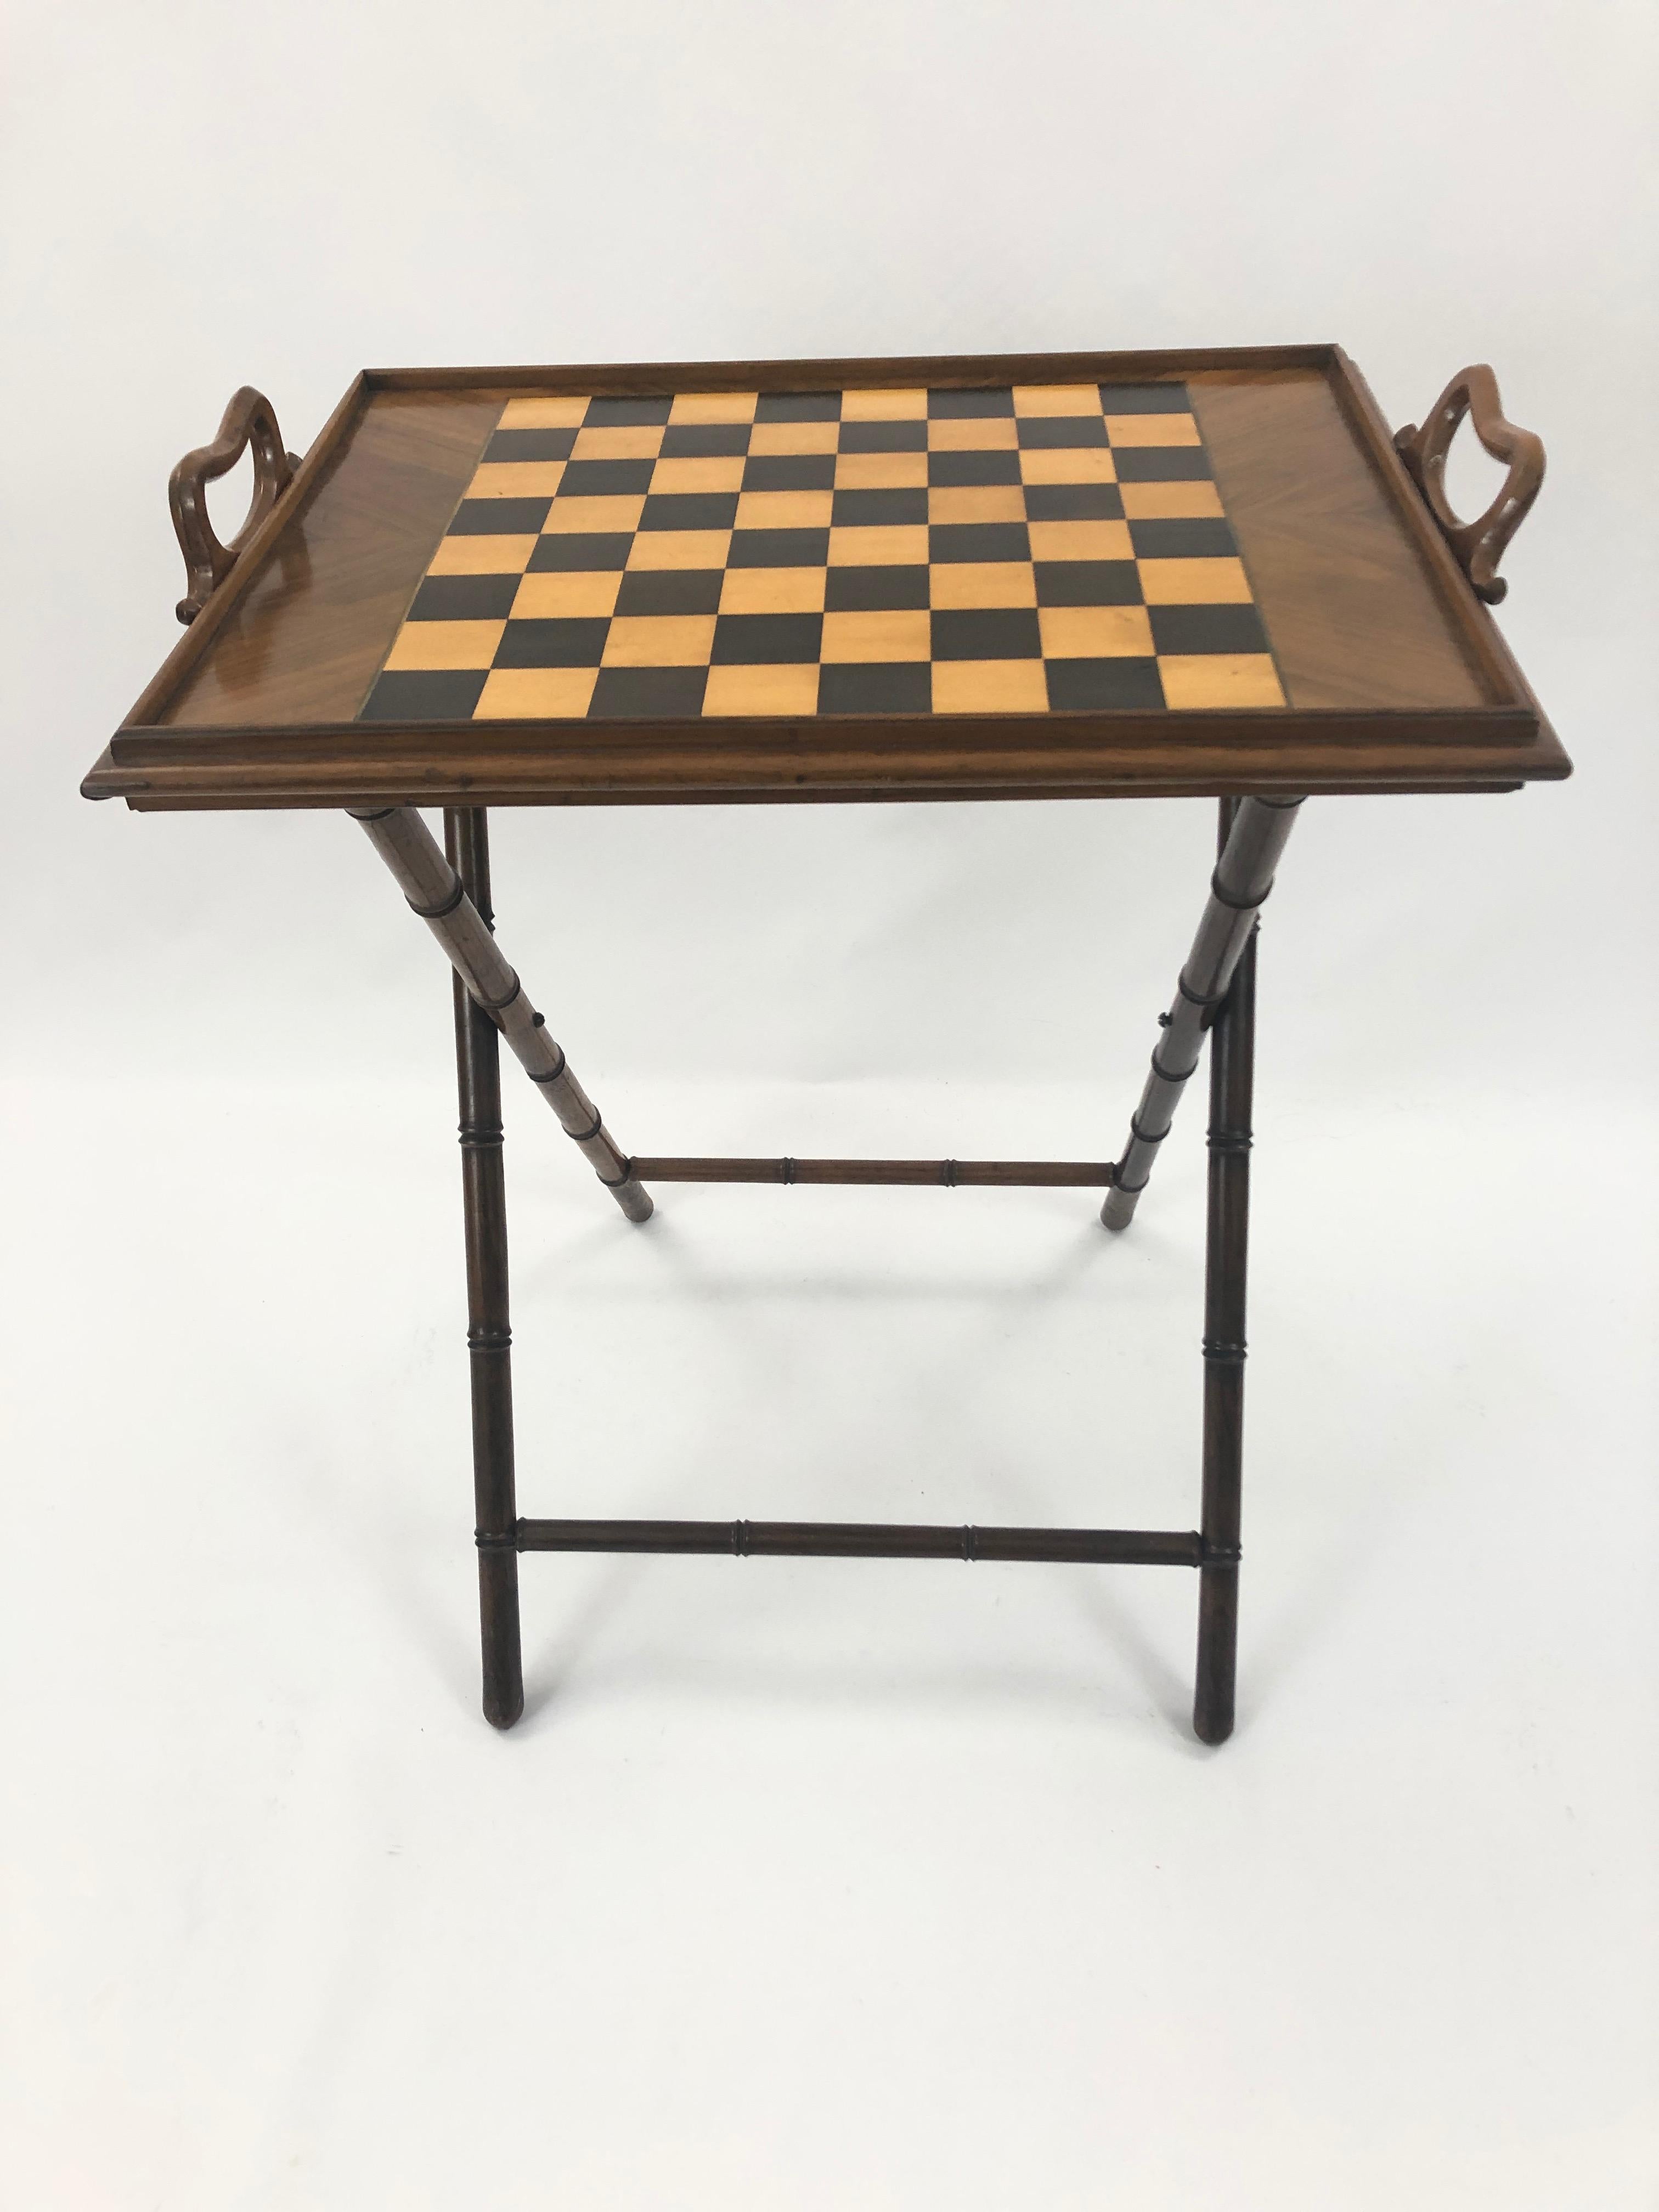 North American Incredible Walnut Inlaid Figural Tray and Game Table